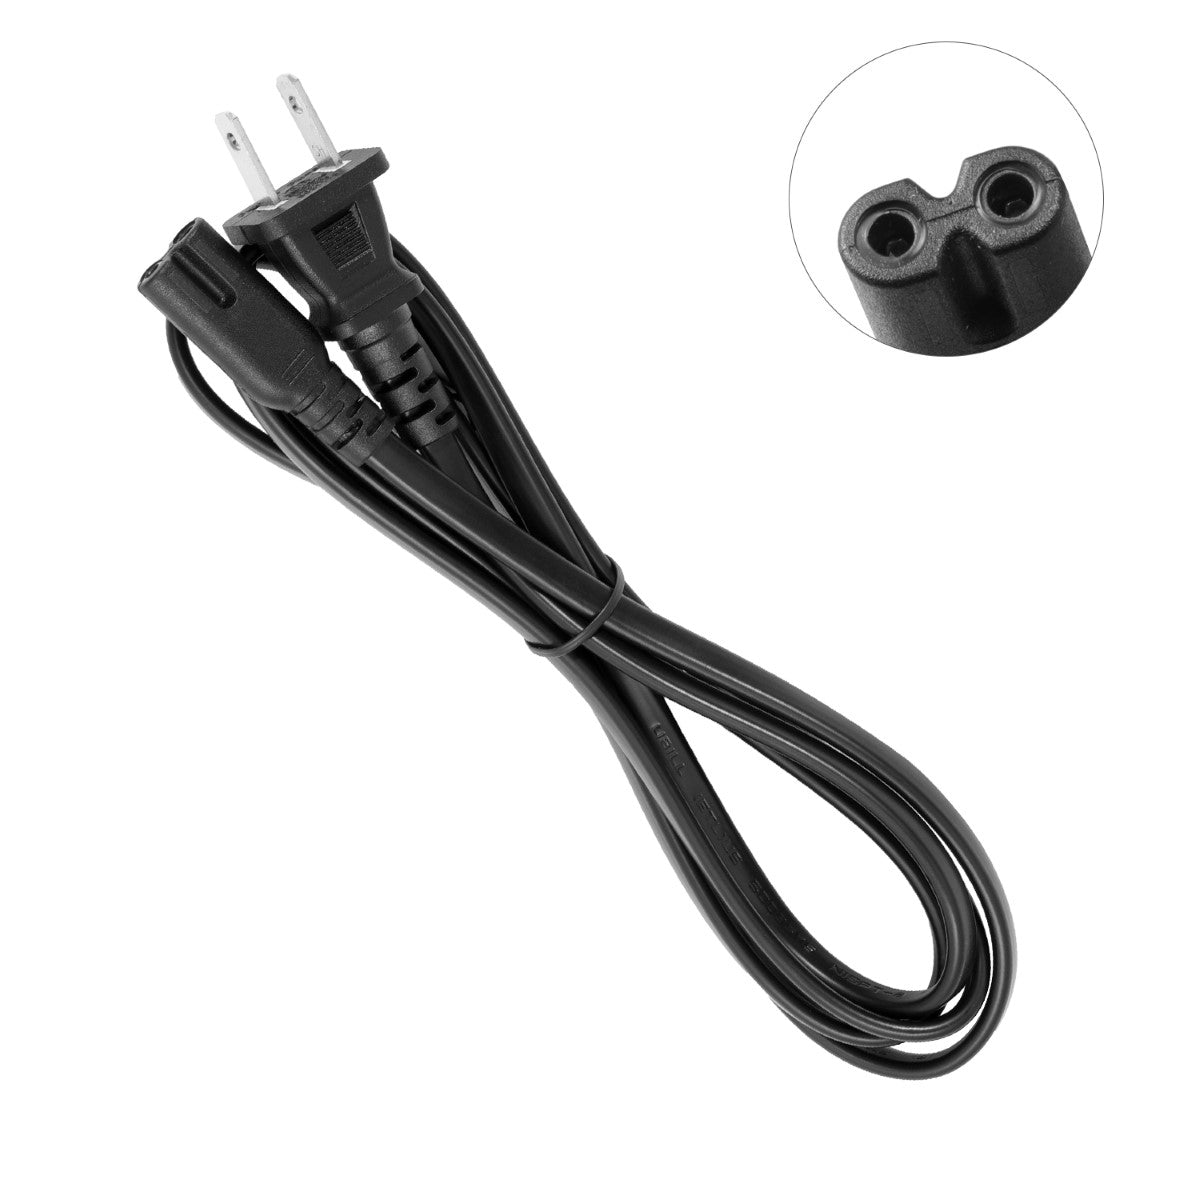 HP ENVY 5642 e-All-in-One Power Cord